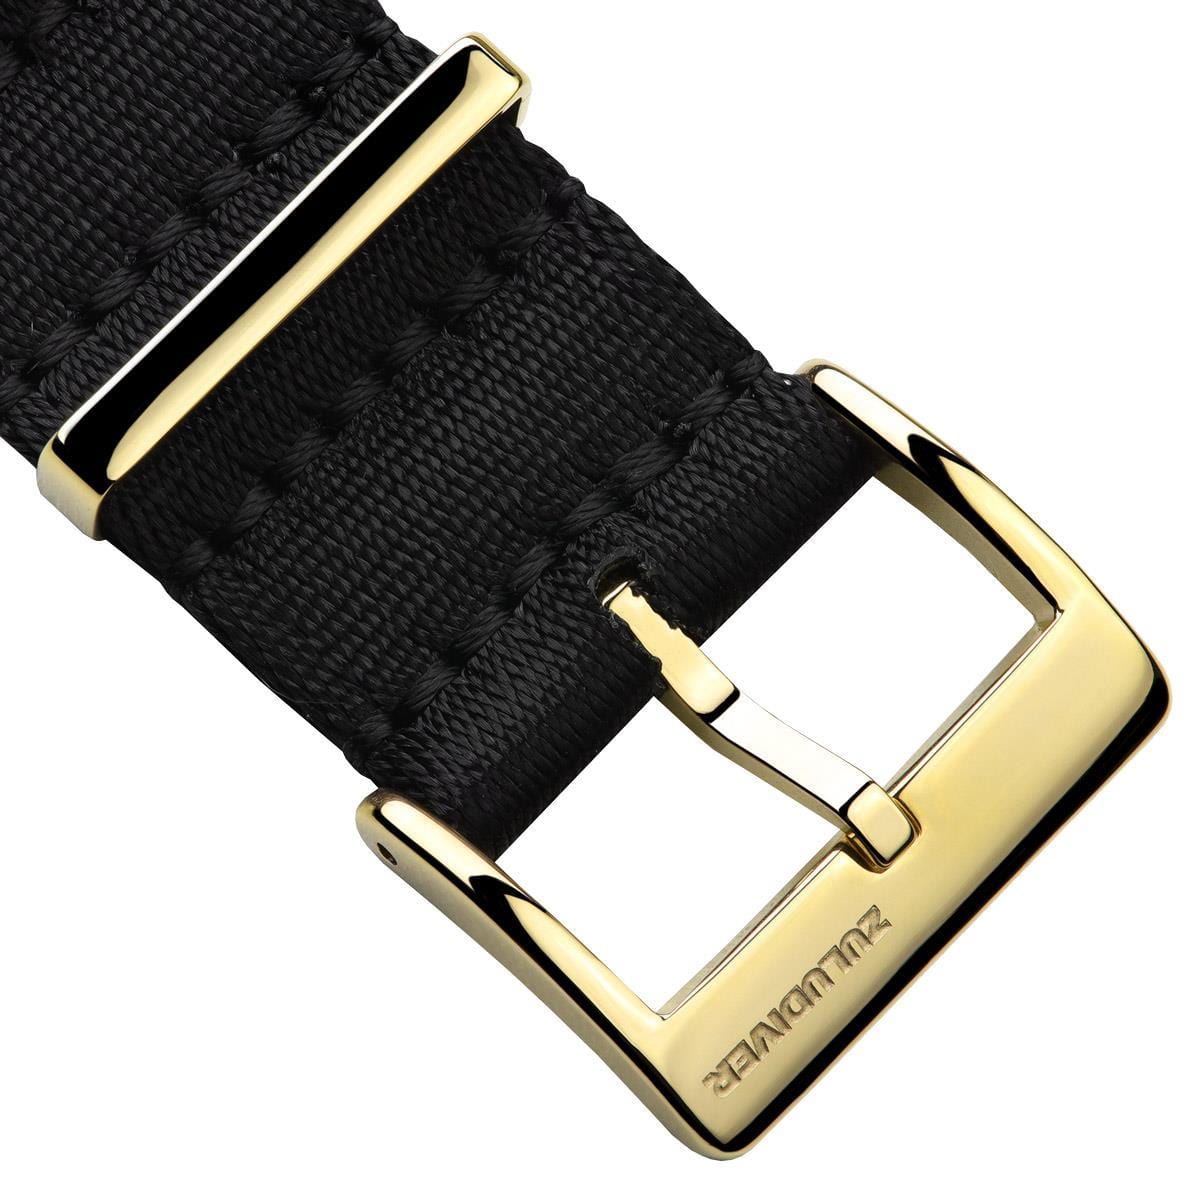 ZULUDIVER 1973 British Military Watch Strap: ARMOURED RECON - Military Black, IP Gold